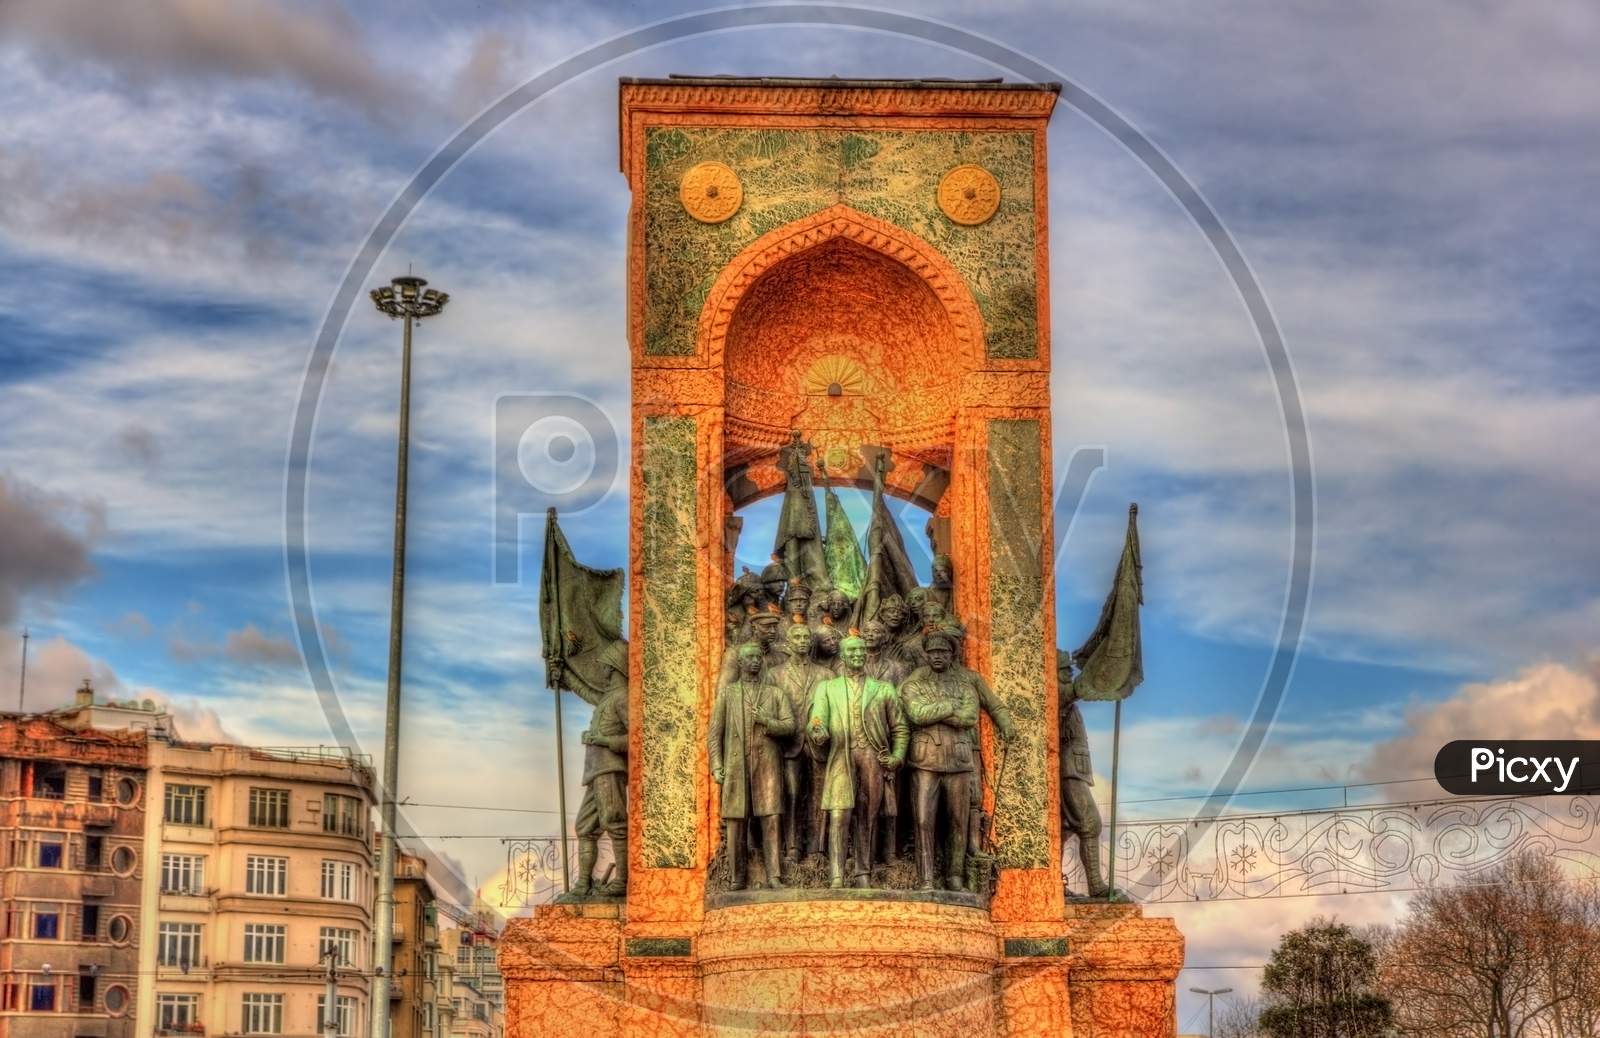 Monument Of The Republic On Taksim Square In Istanbul - Turkey